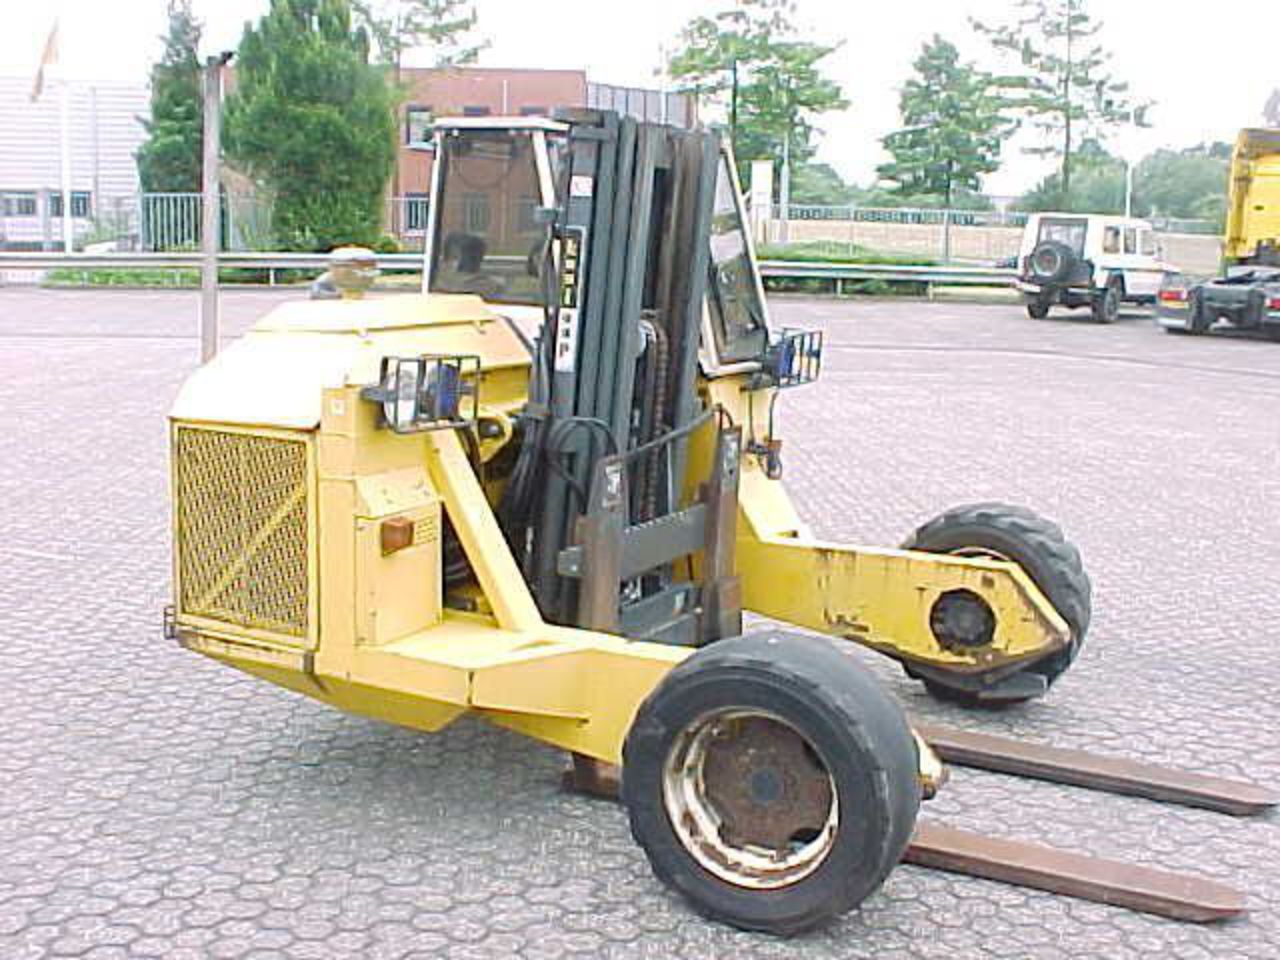 Photo 3: VOLVO FM7 4X2 truck mounted forklift